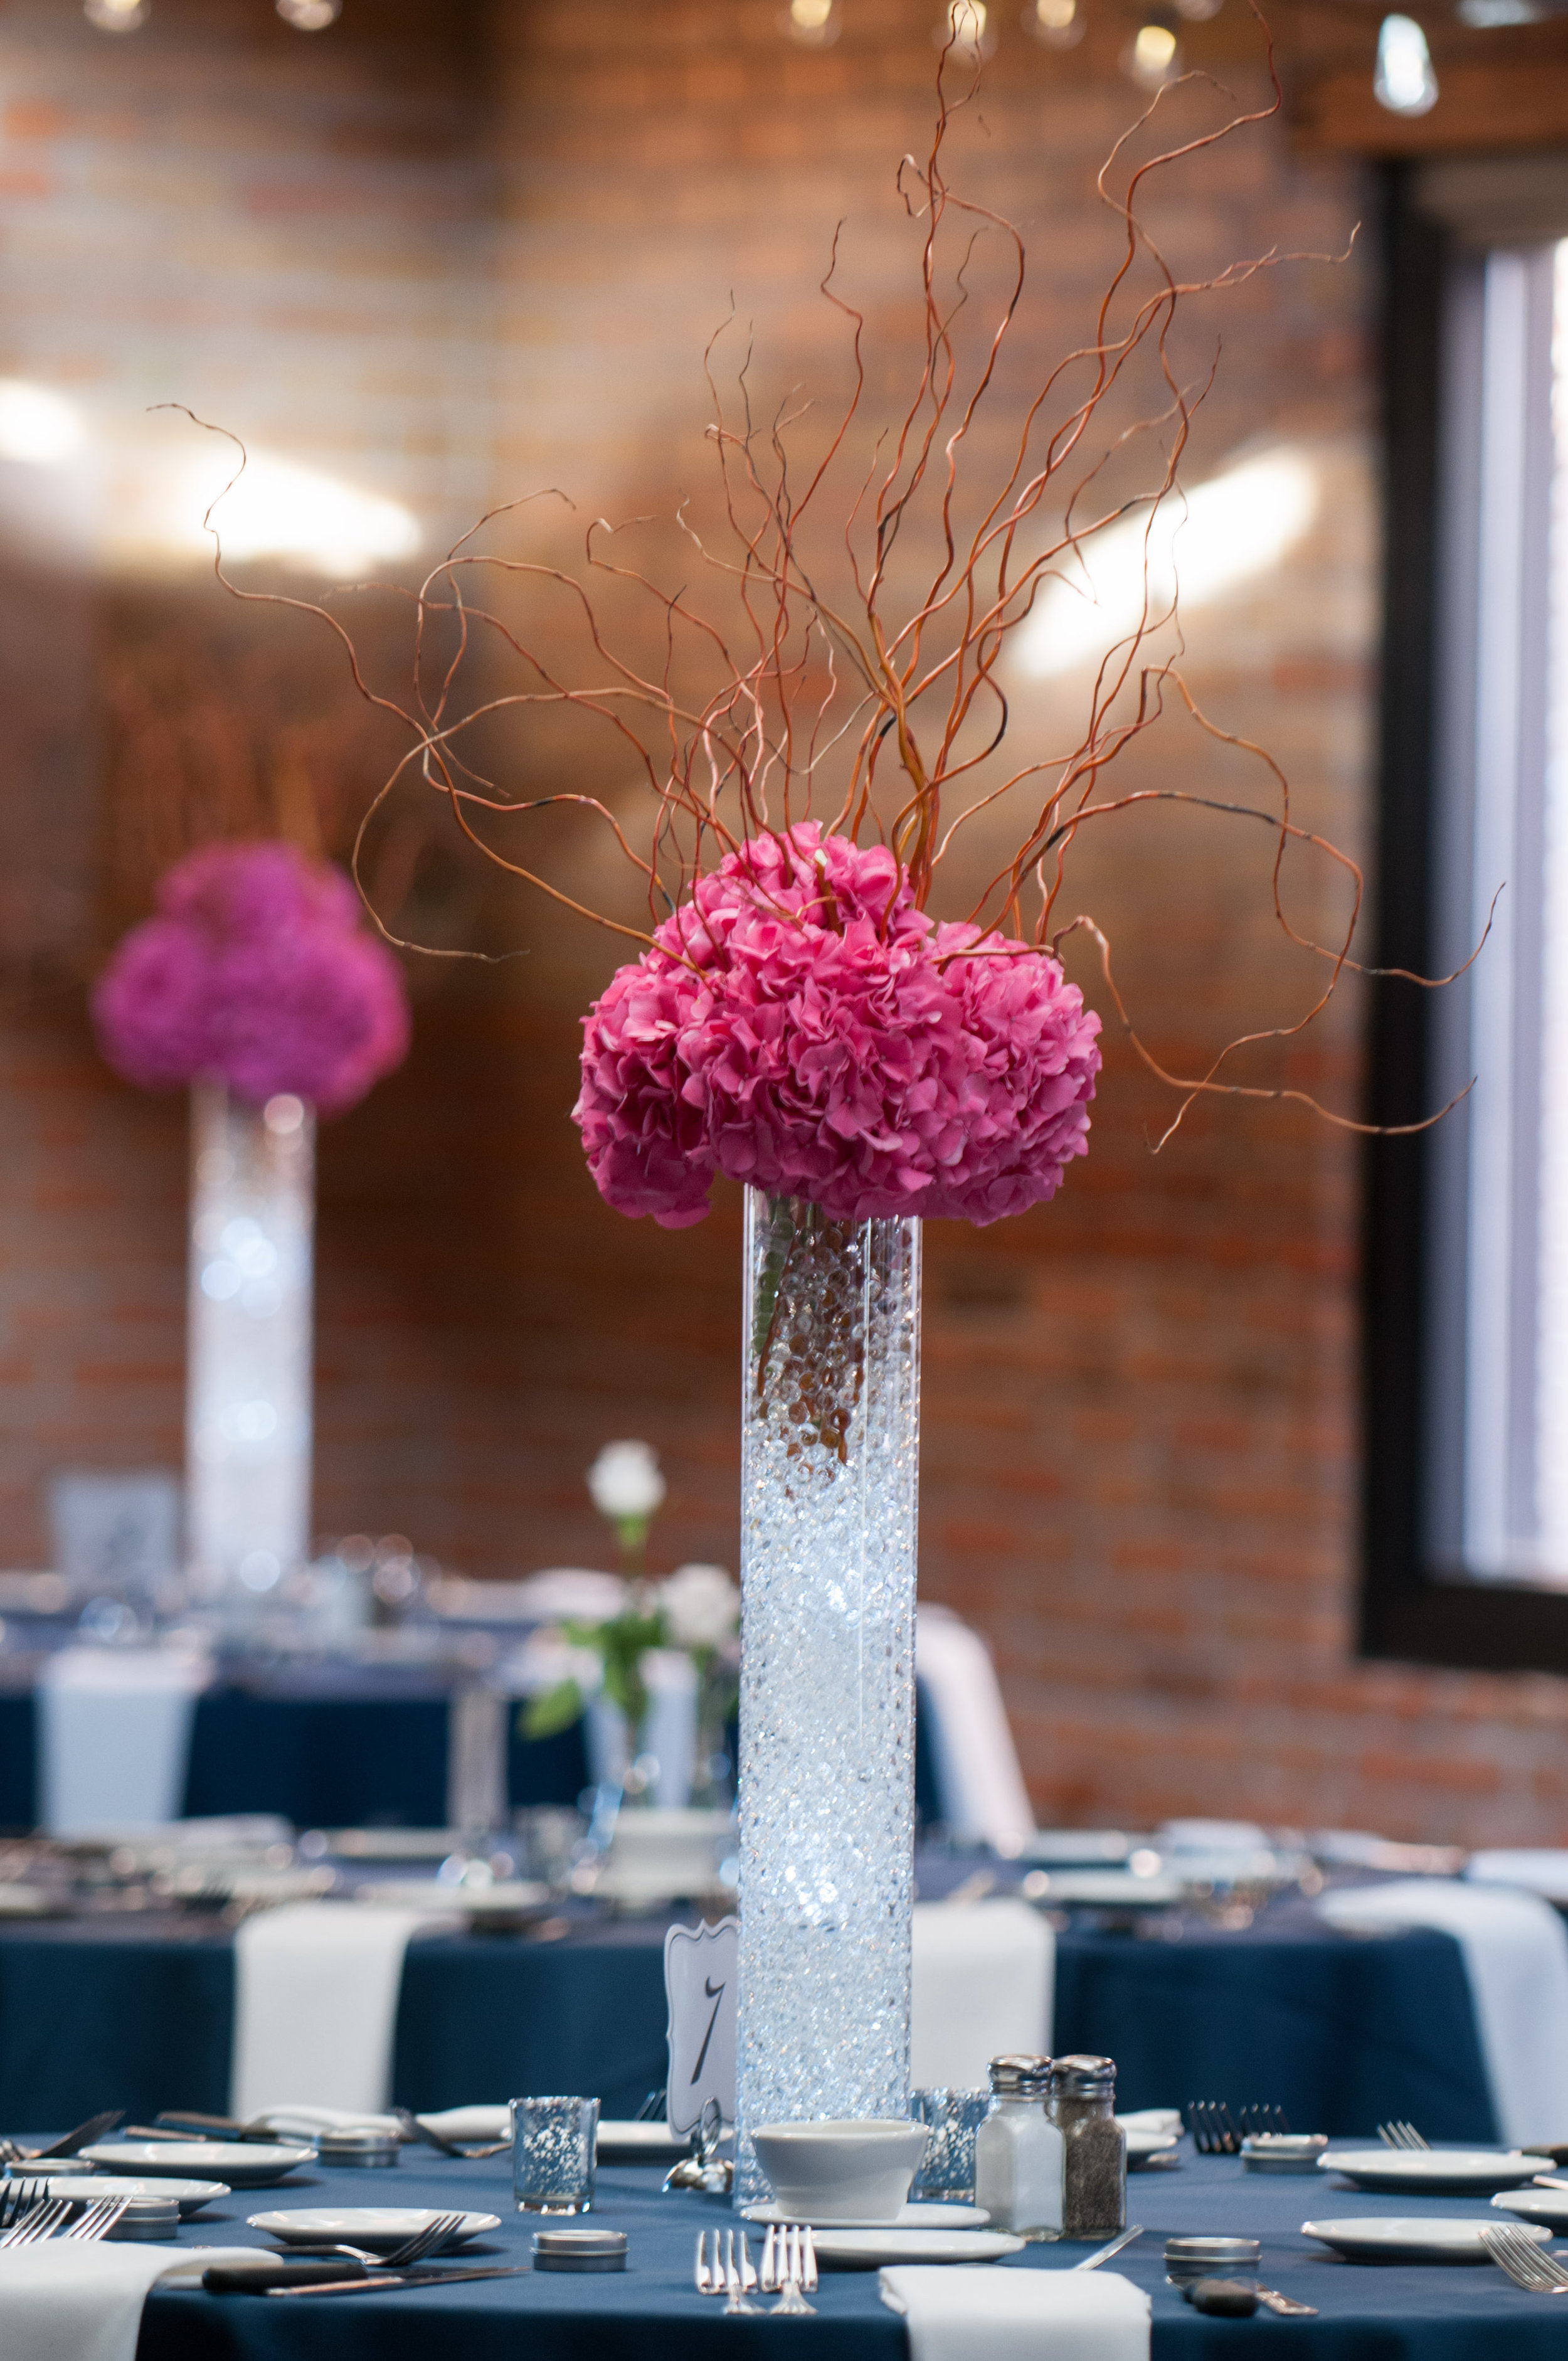 Photography:&nbsp; Coopersmith Photography &nbsp;| Planner: The Simply Elegant Group | DJ:&nbsp; Adagio Djay Entertainment &nbsp;| Bakery: Cocoa and Fig &nbsp;| Dress Designer: JenMar Creations &nbsp;| Floral Designer: Julia’s Blooms &nbsp;| Event Venue:&nbsp; The Riverside Room at Minneapolis Event Center